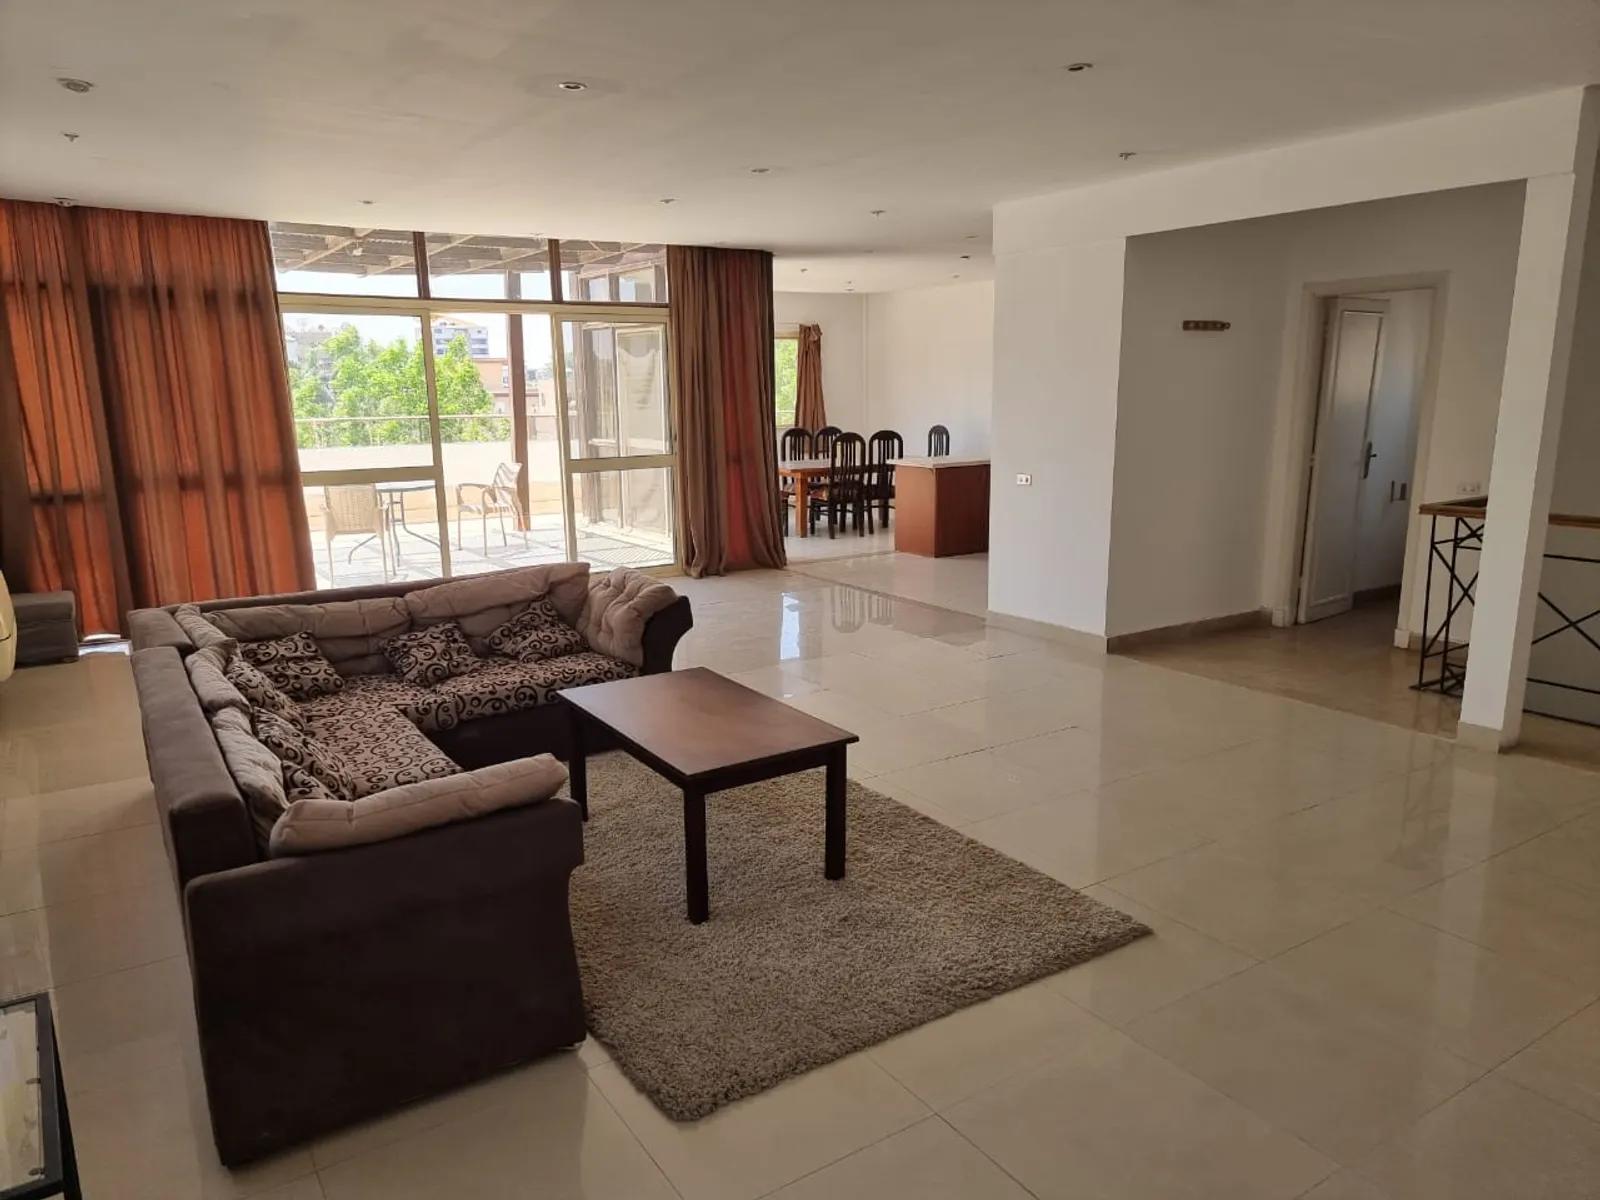 Penthouses For Sale In Maadi Maadi Sarayat Area: 300 m² consists of 4 Bedrooms 4 Bathrooms Modern furnished 5 stars #2920